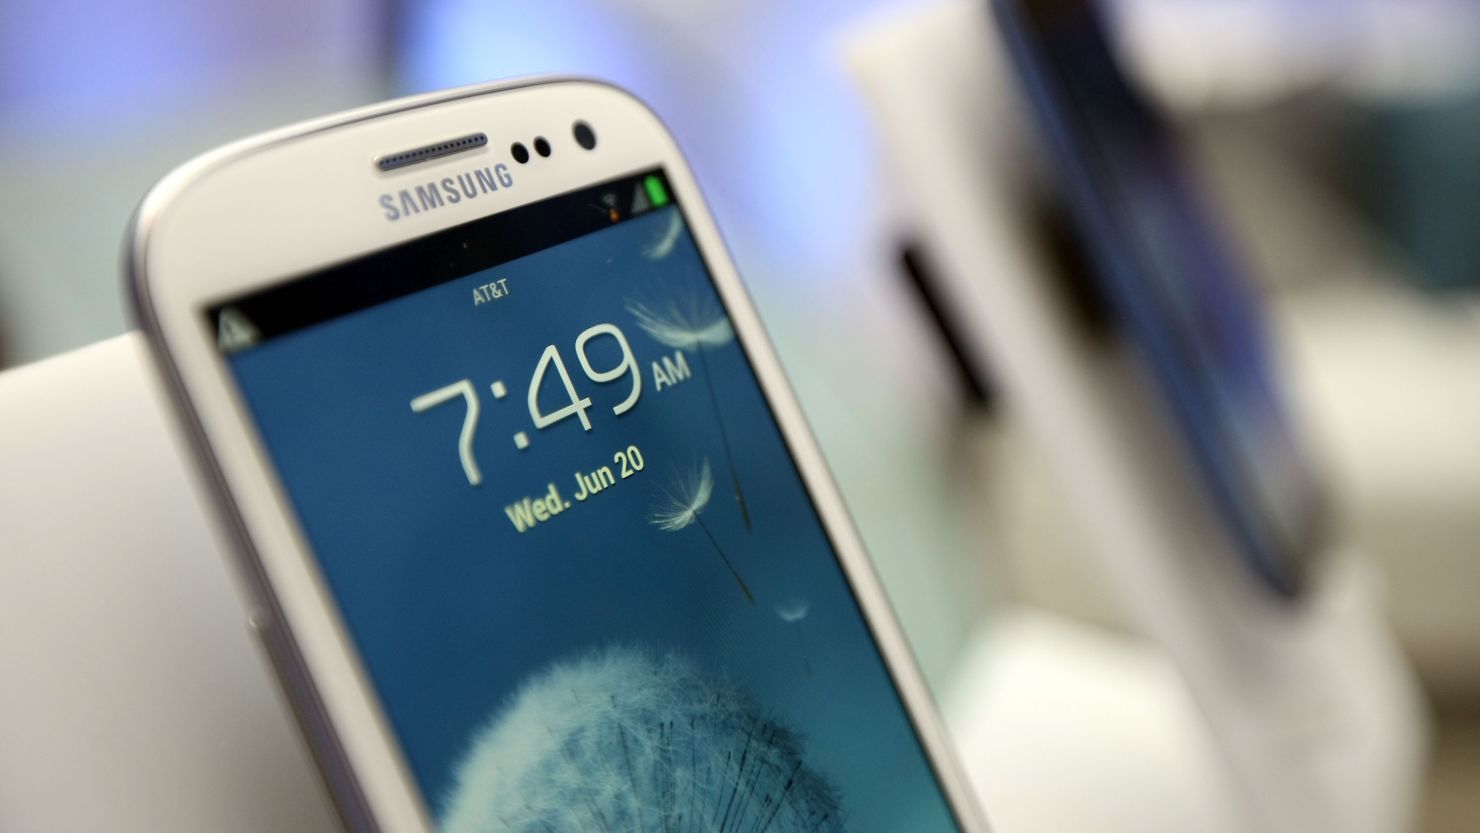 The Samsung Galaxy S III was launched in the United States in June and, to date, has reportedly sold more than 20 million units.